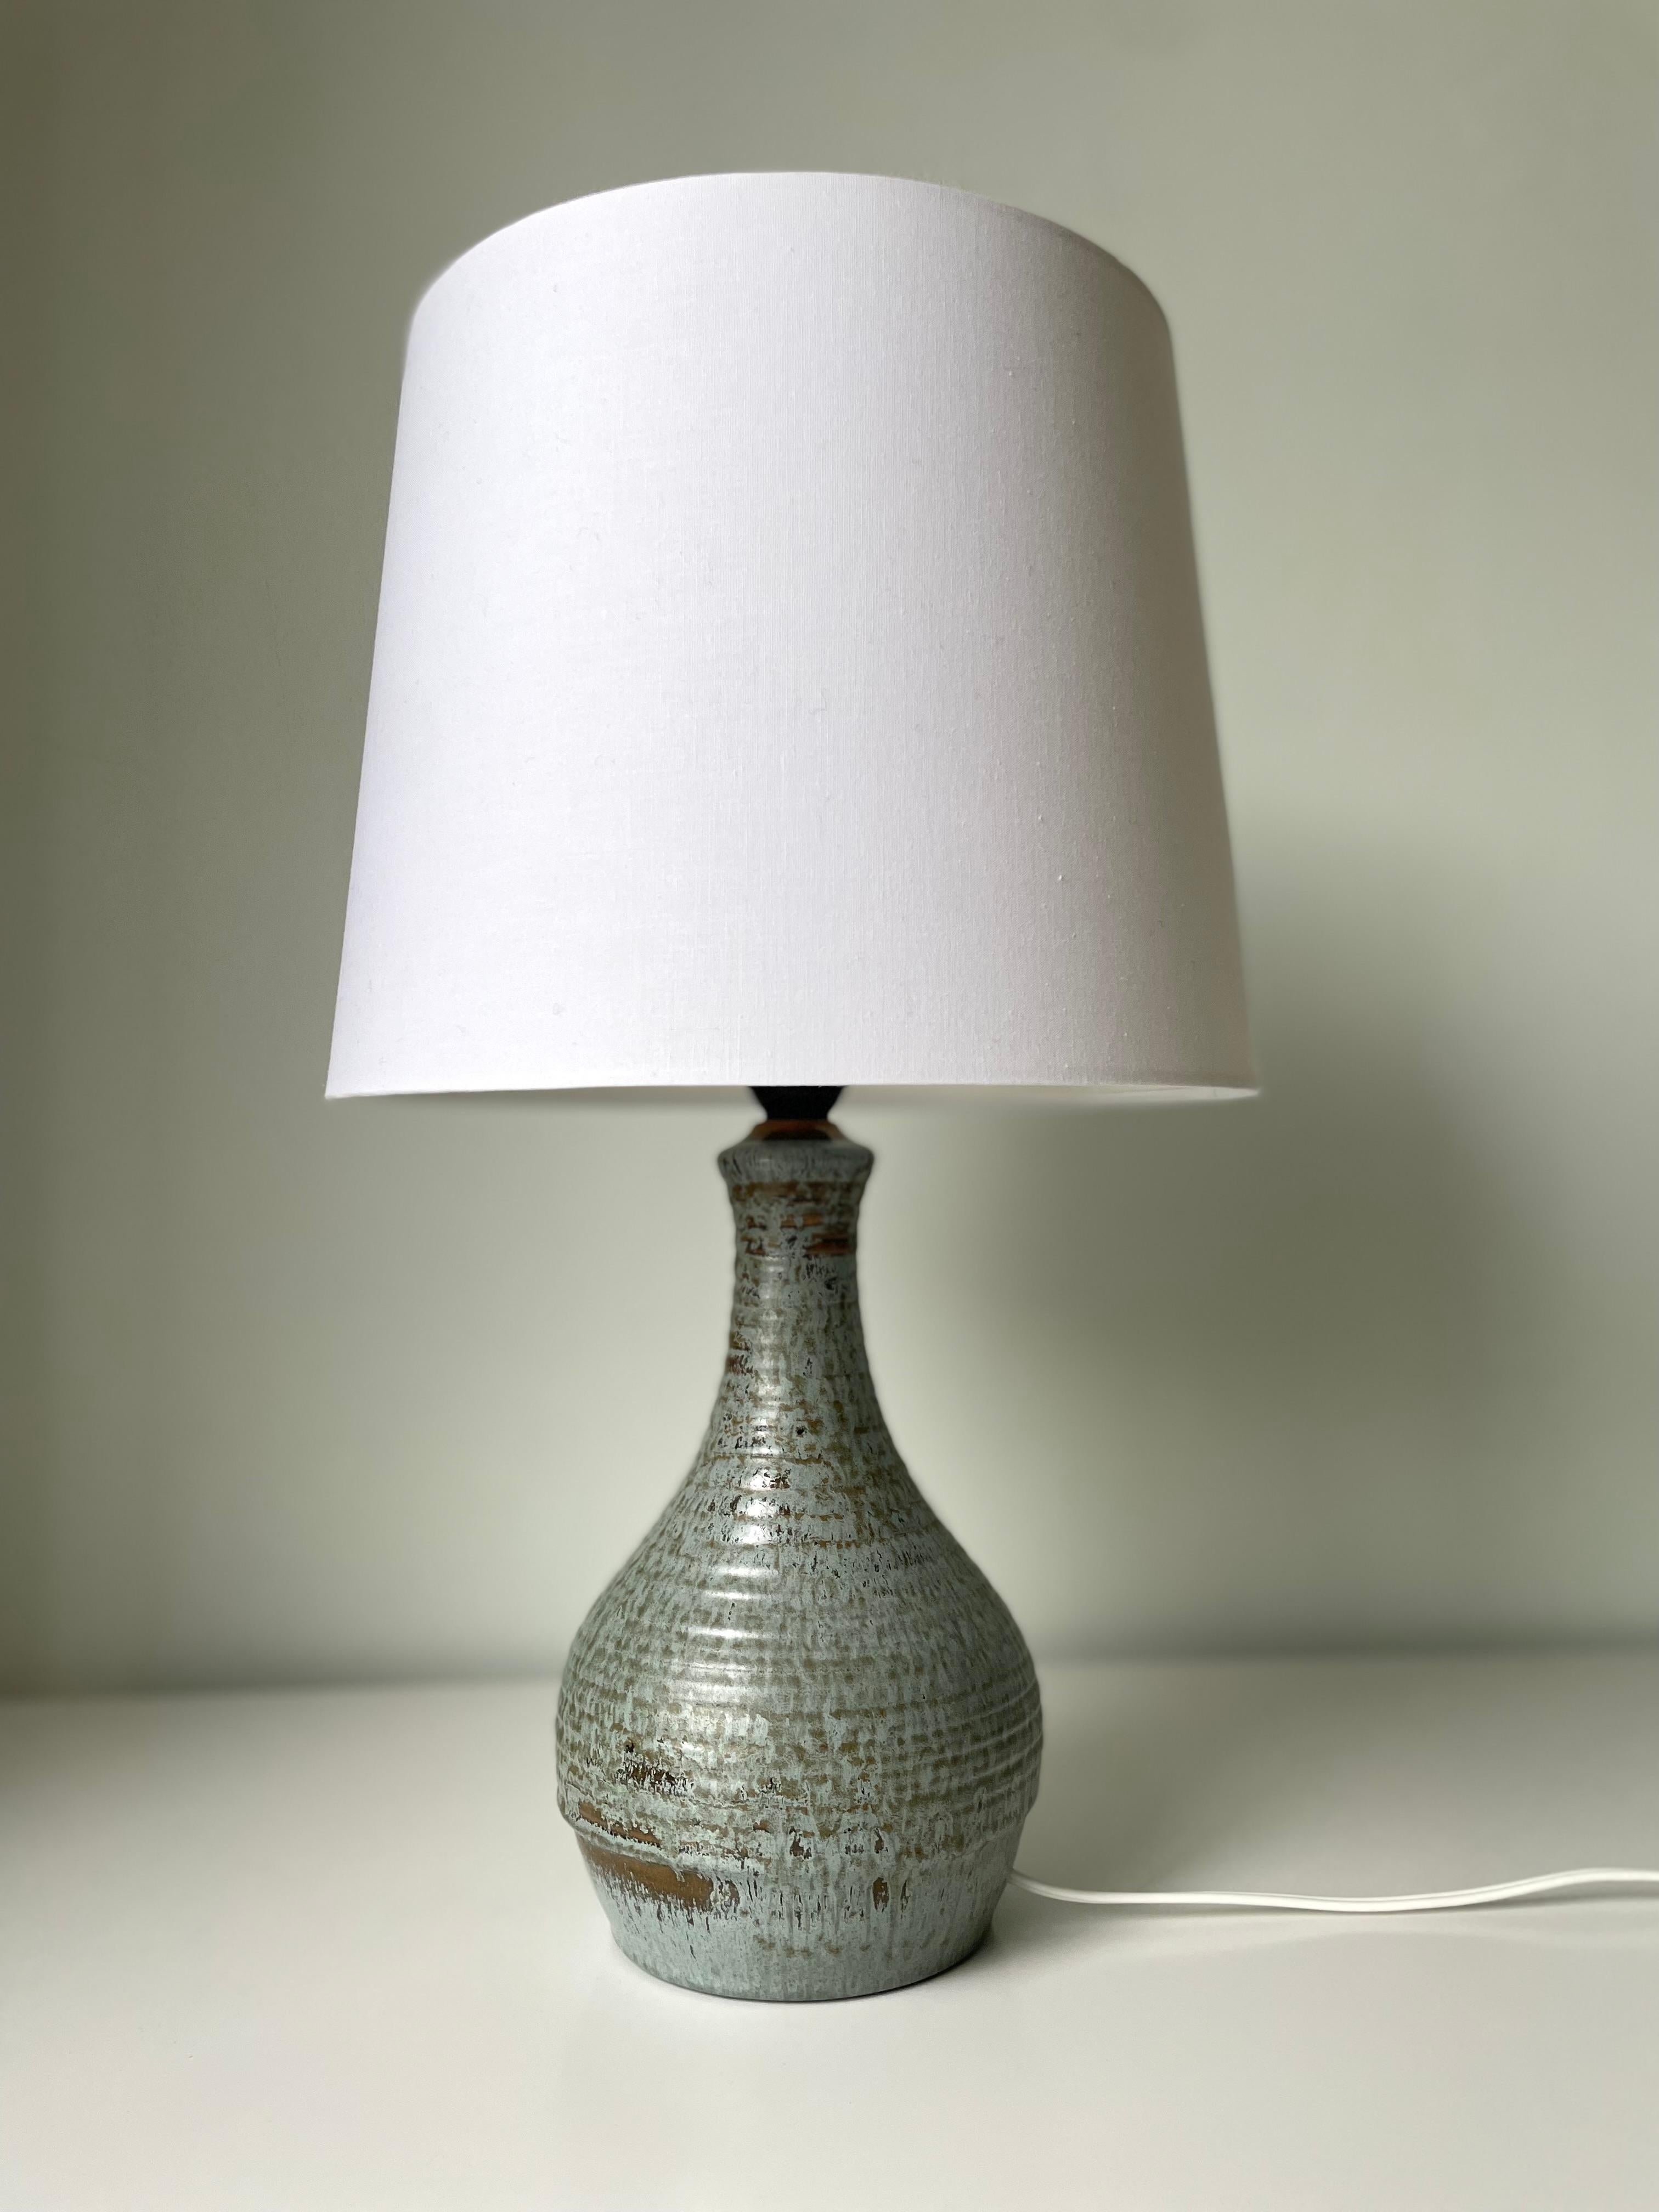 Danish Modern ceramic table lamp with
dusty blue and brown speckled glaze over soft shaped body and slender neck. Handmade by ceramic artist Børge Christoffersen in the 1960s. Signed and stamped under base. Rewired with switch on original fitting